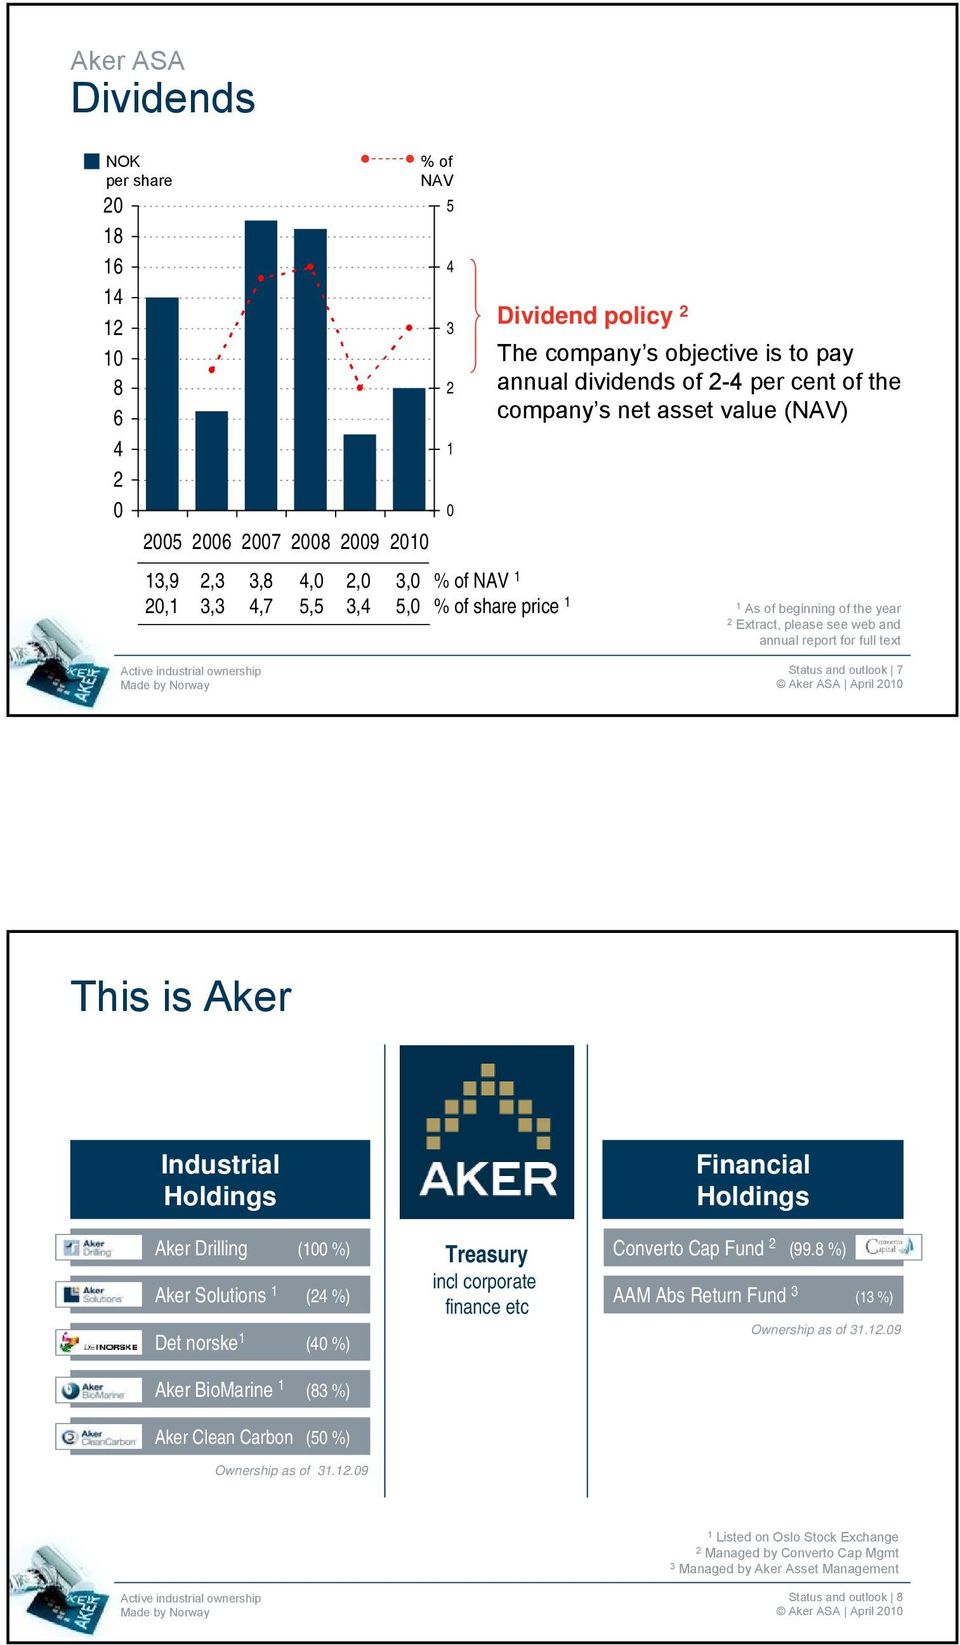 for full text Status and outlook 7 This is Aker Industrial Holdings Aker Drilling (100 %) Aker Solutions 1 (24 %) Det norske 1 (40 %) Aker BioMarine 1 (83 %) Aker Clean Carbon (50 %) Ownership as of